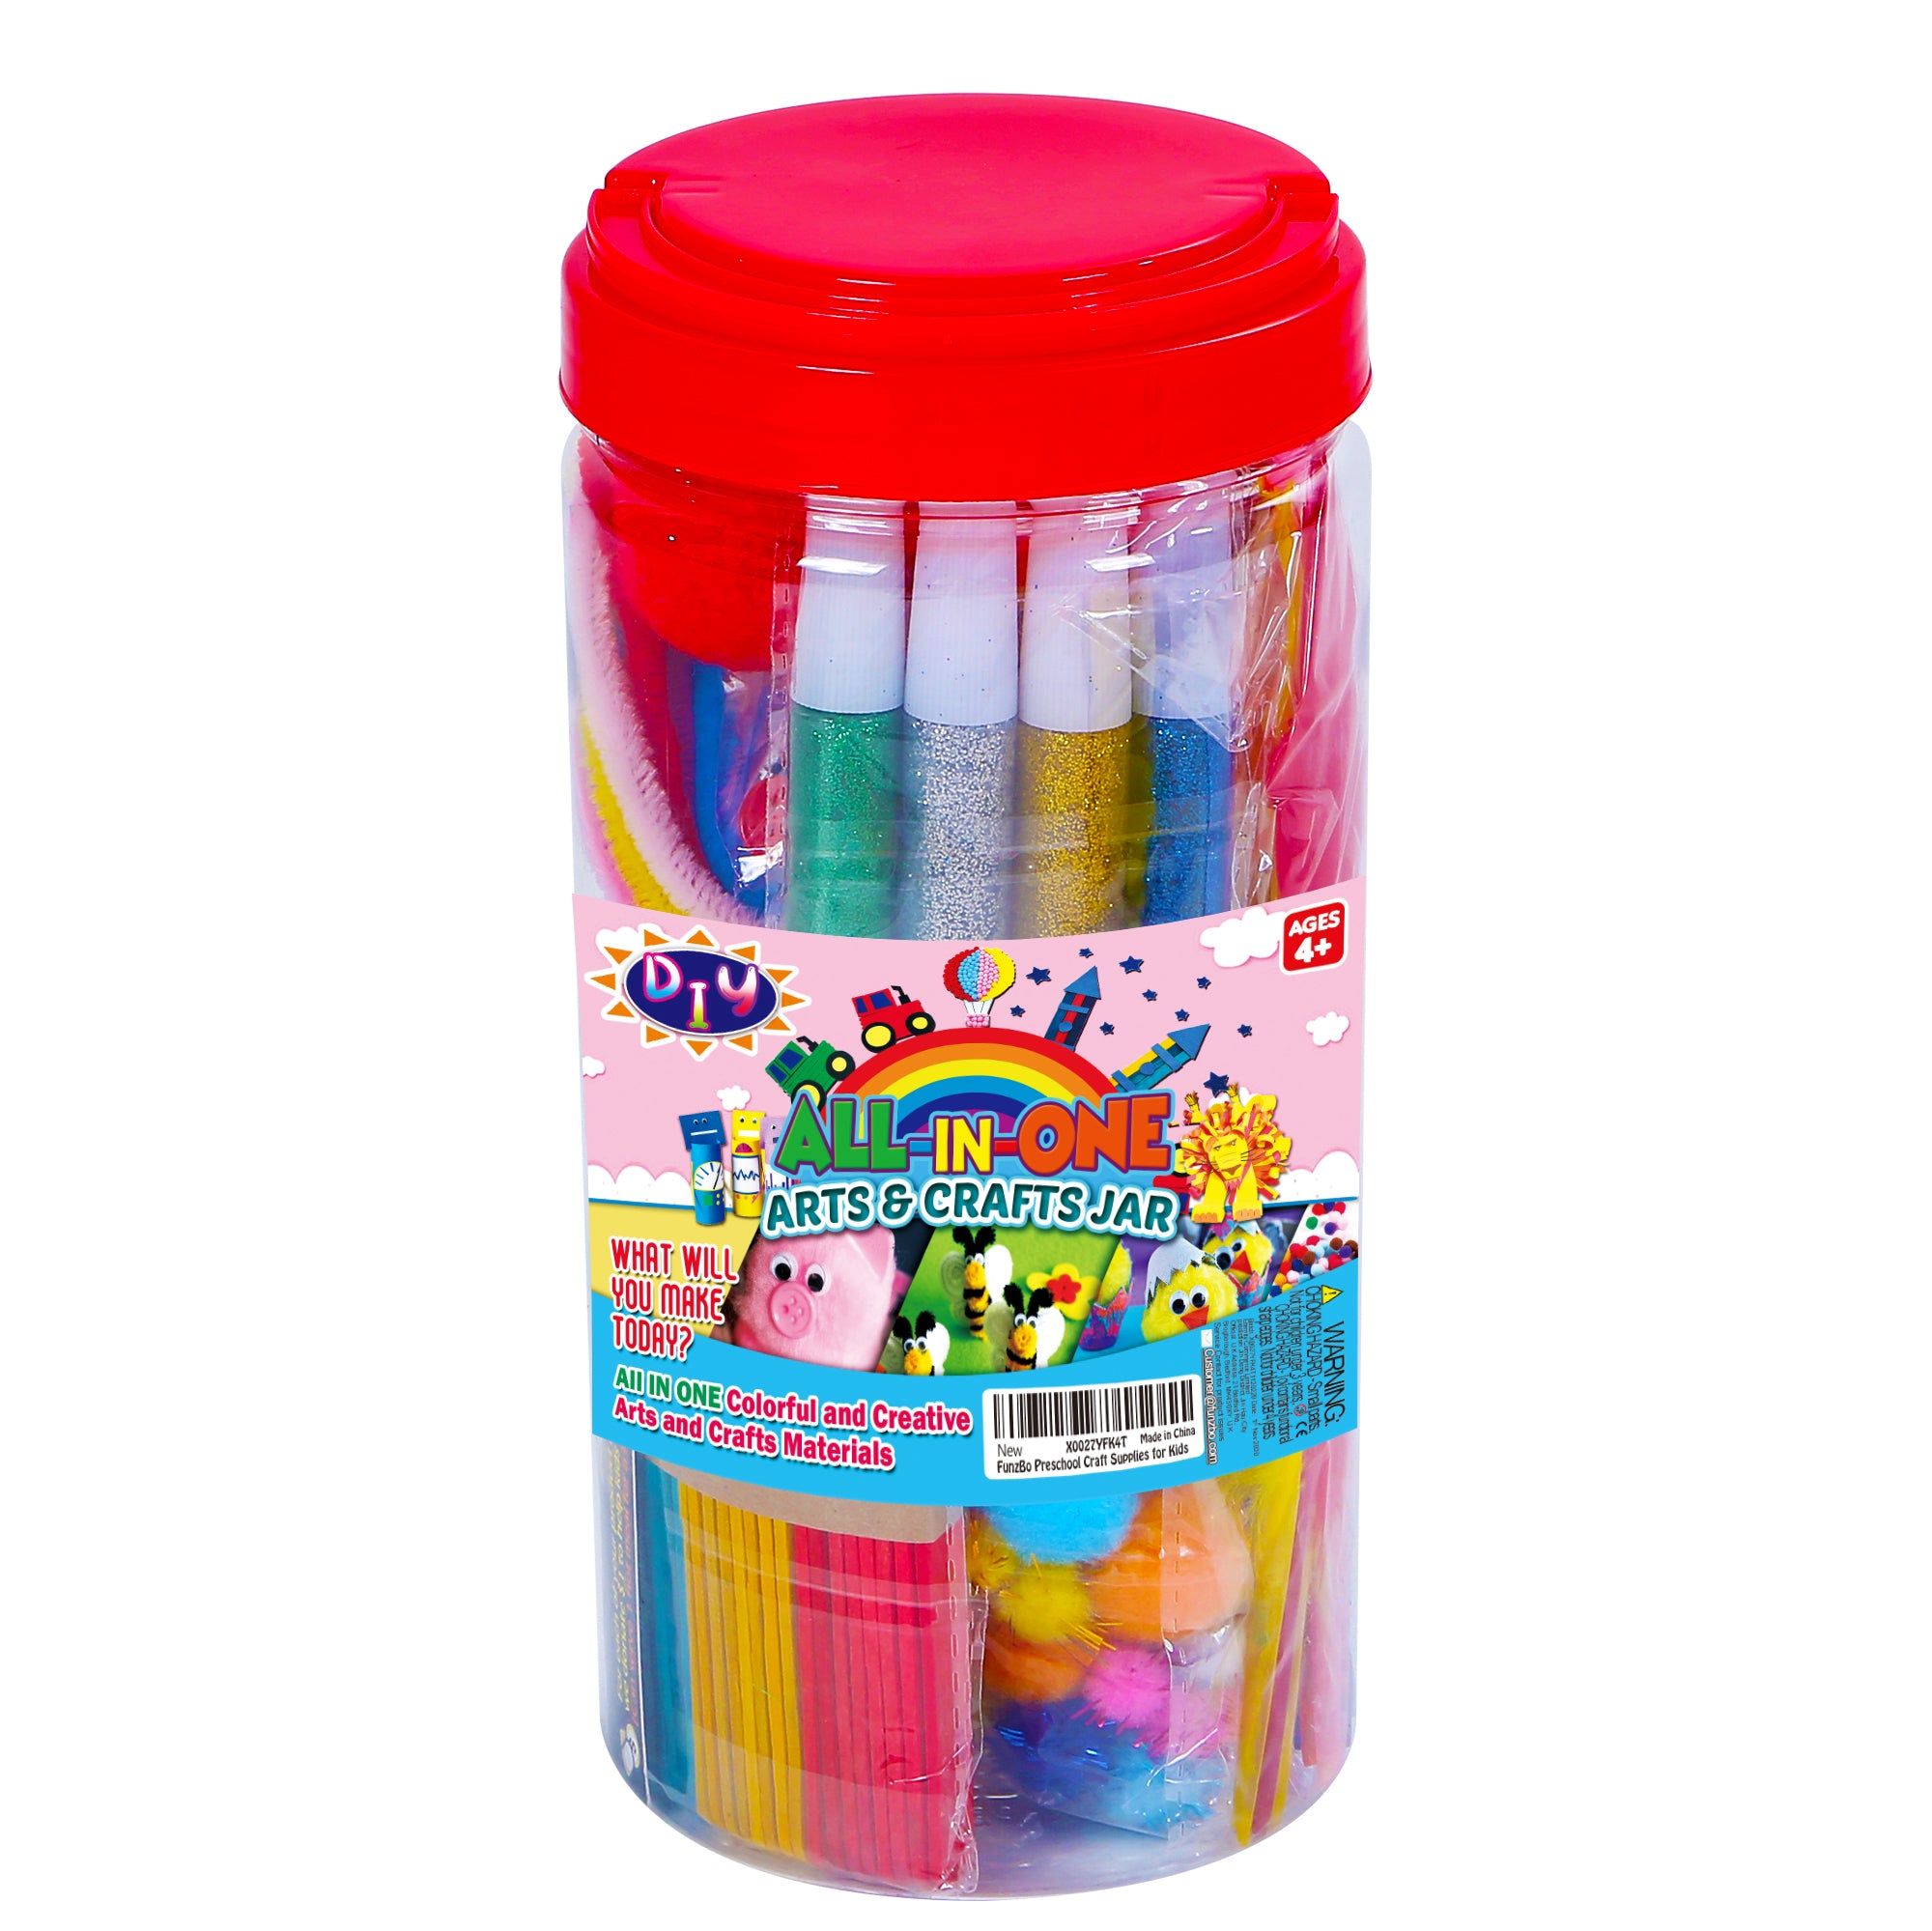  FUNZBO Arts and Crafts Supplies for Kids - 4000+pcs Arts and  Crafts Materials for Kids Age 4 5 6 7 8-12 Gifts for Girls and Boys Crafts  for Girls Ages 8-12 Arts Activities : Toys & Games